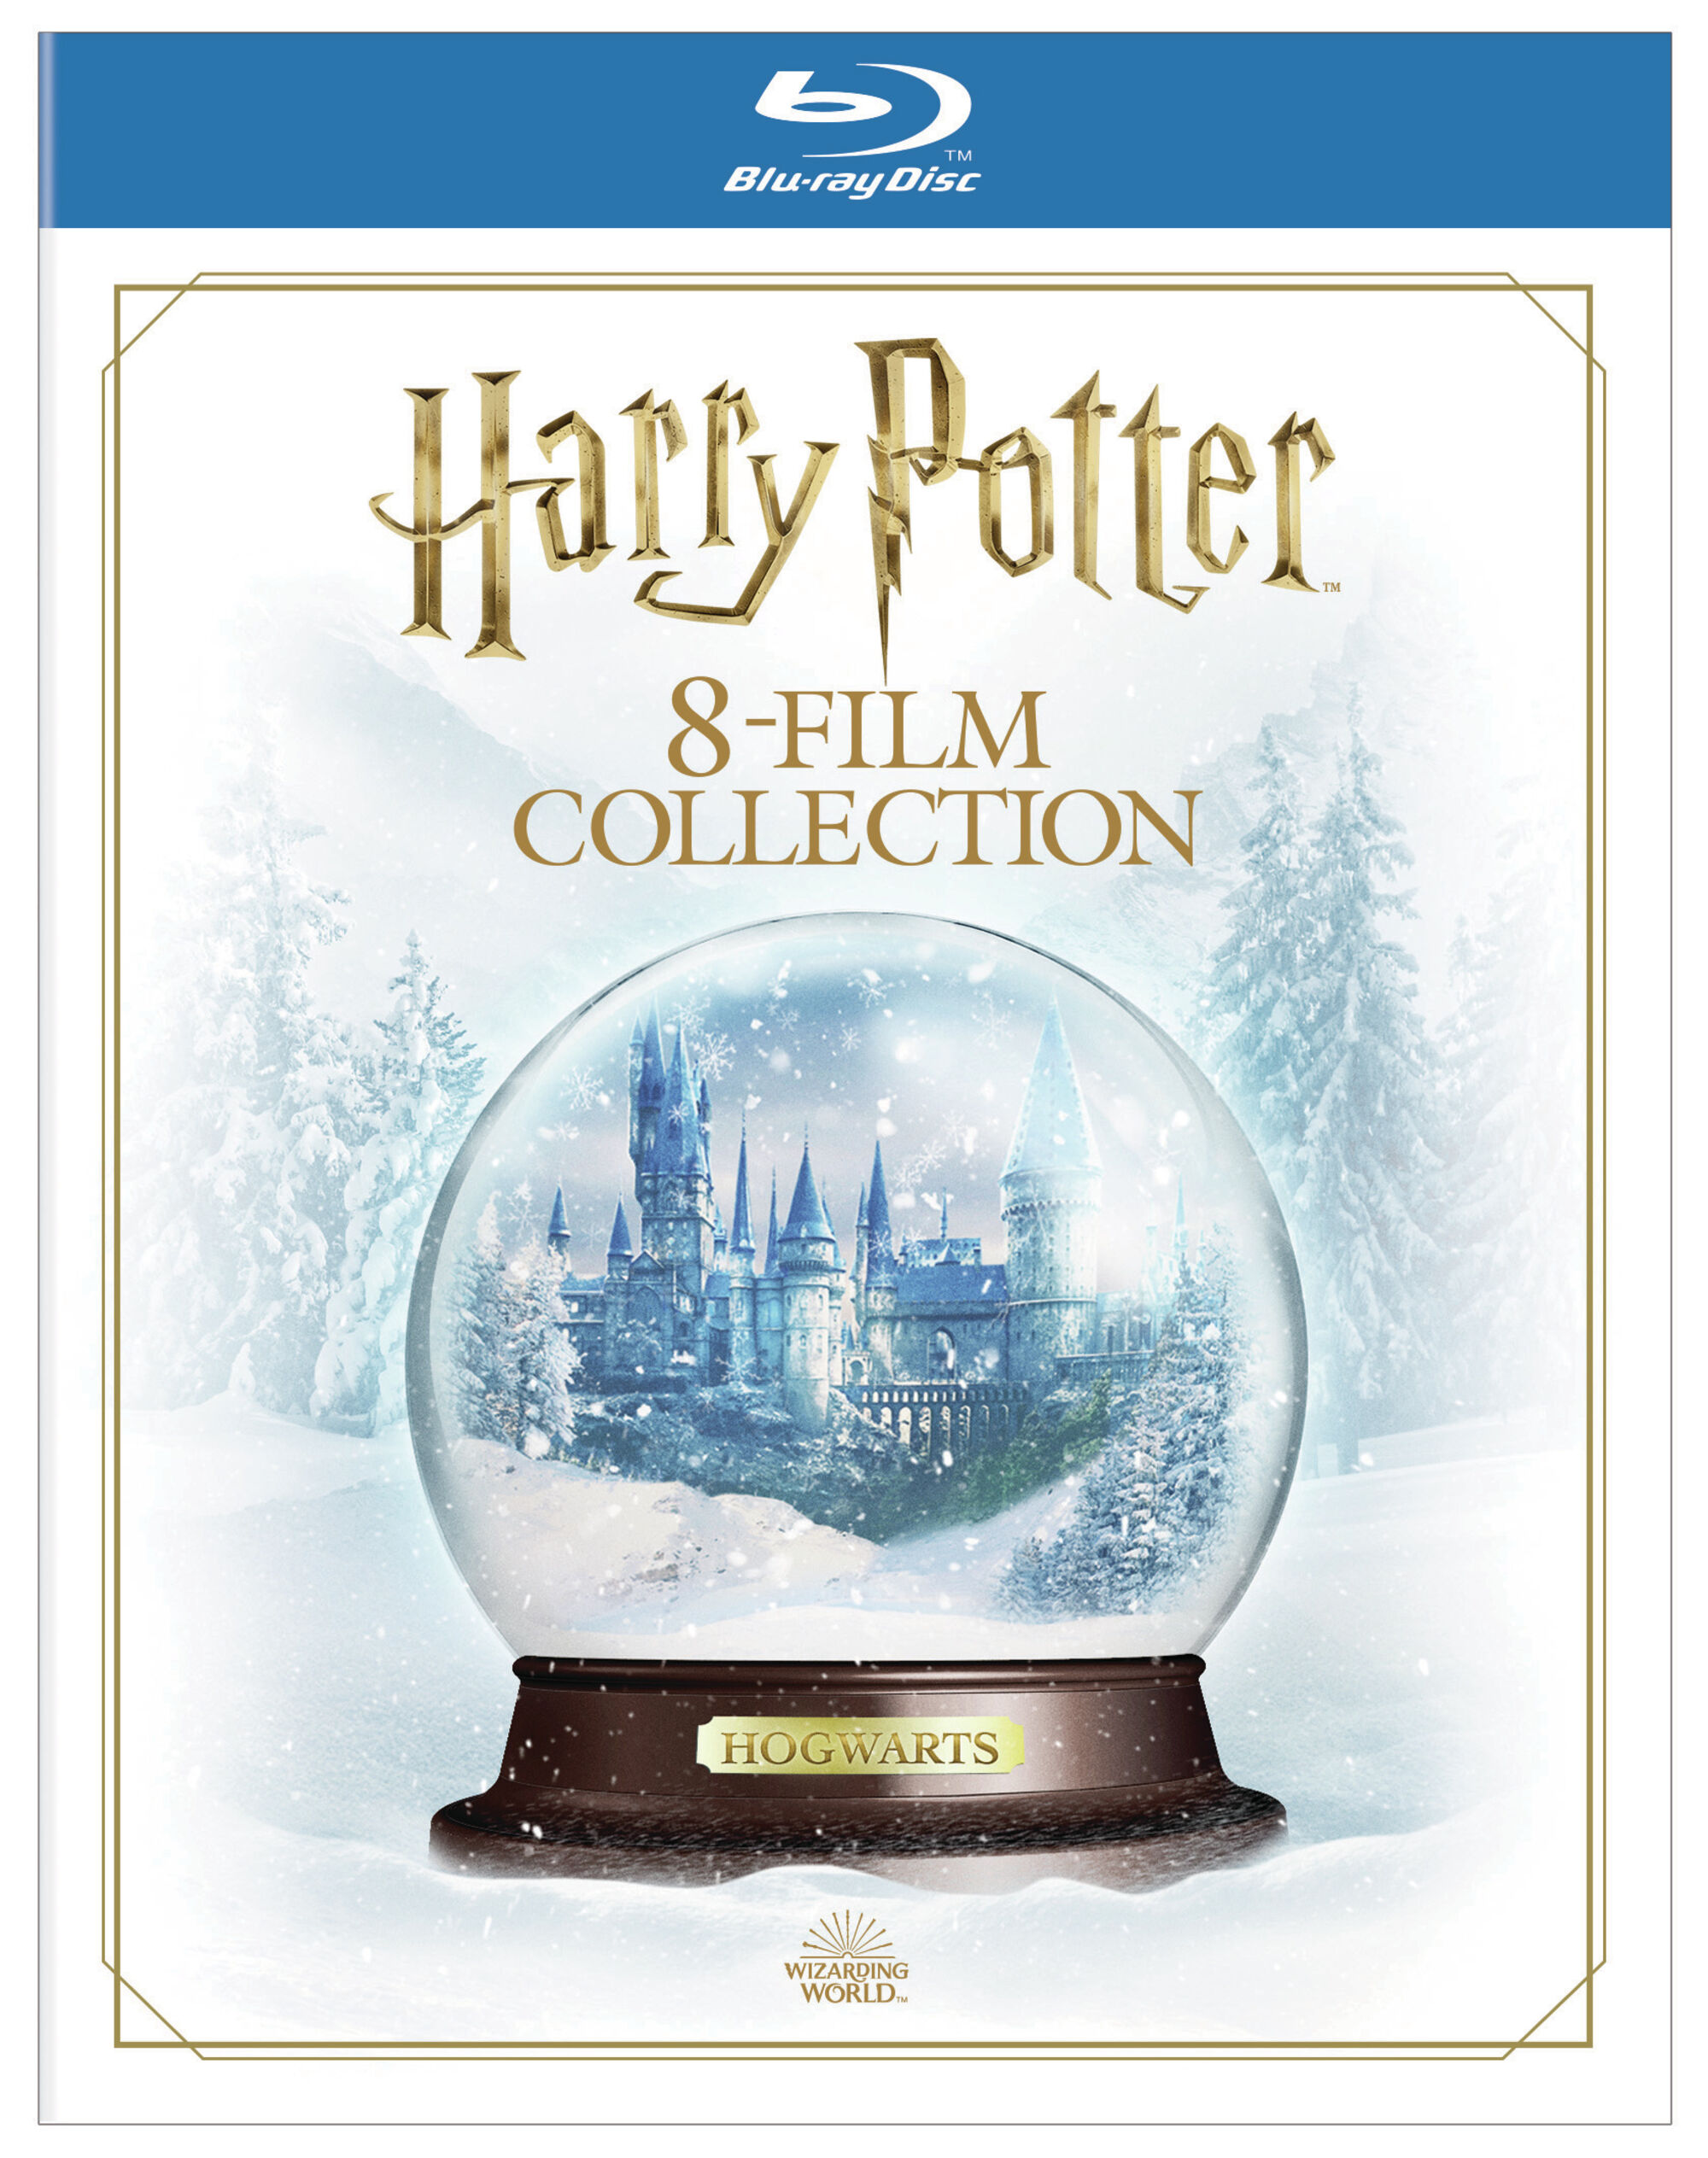 Harry Potter: Complete 8-film Collection - Blu-ray [ 2011 ]  - Adventure Movies On Blu-ray - Movies On GRUV